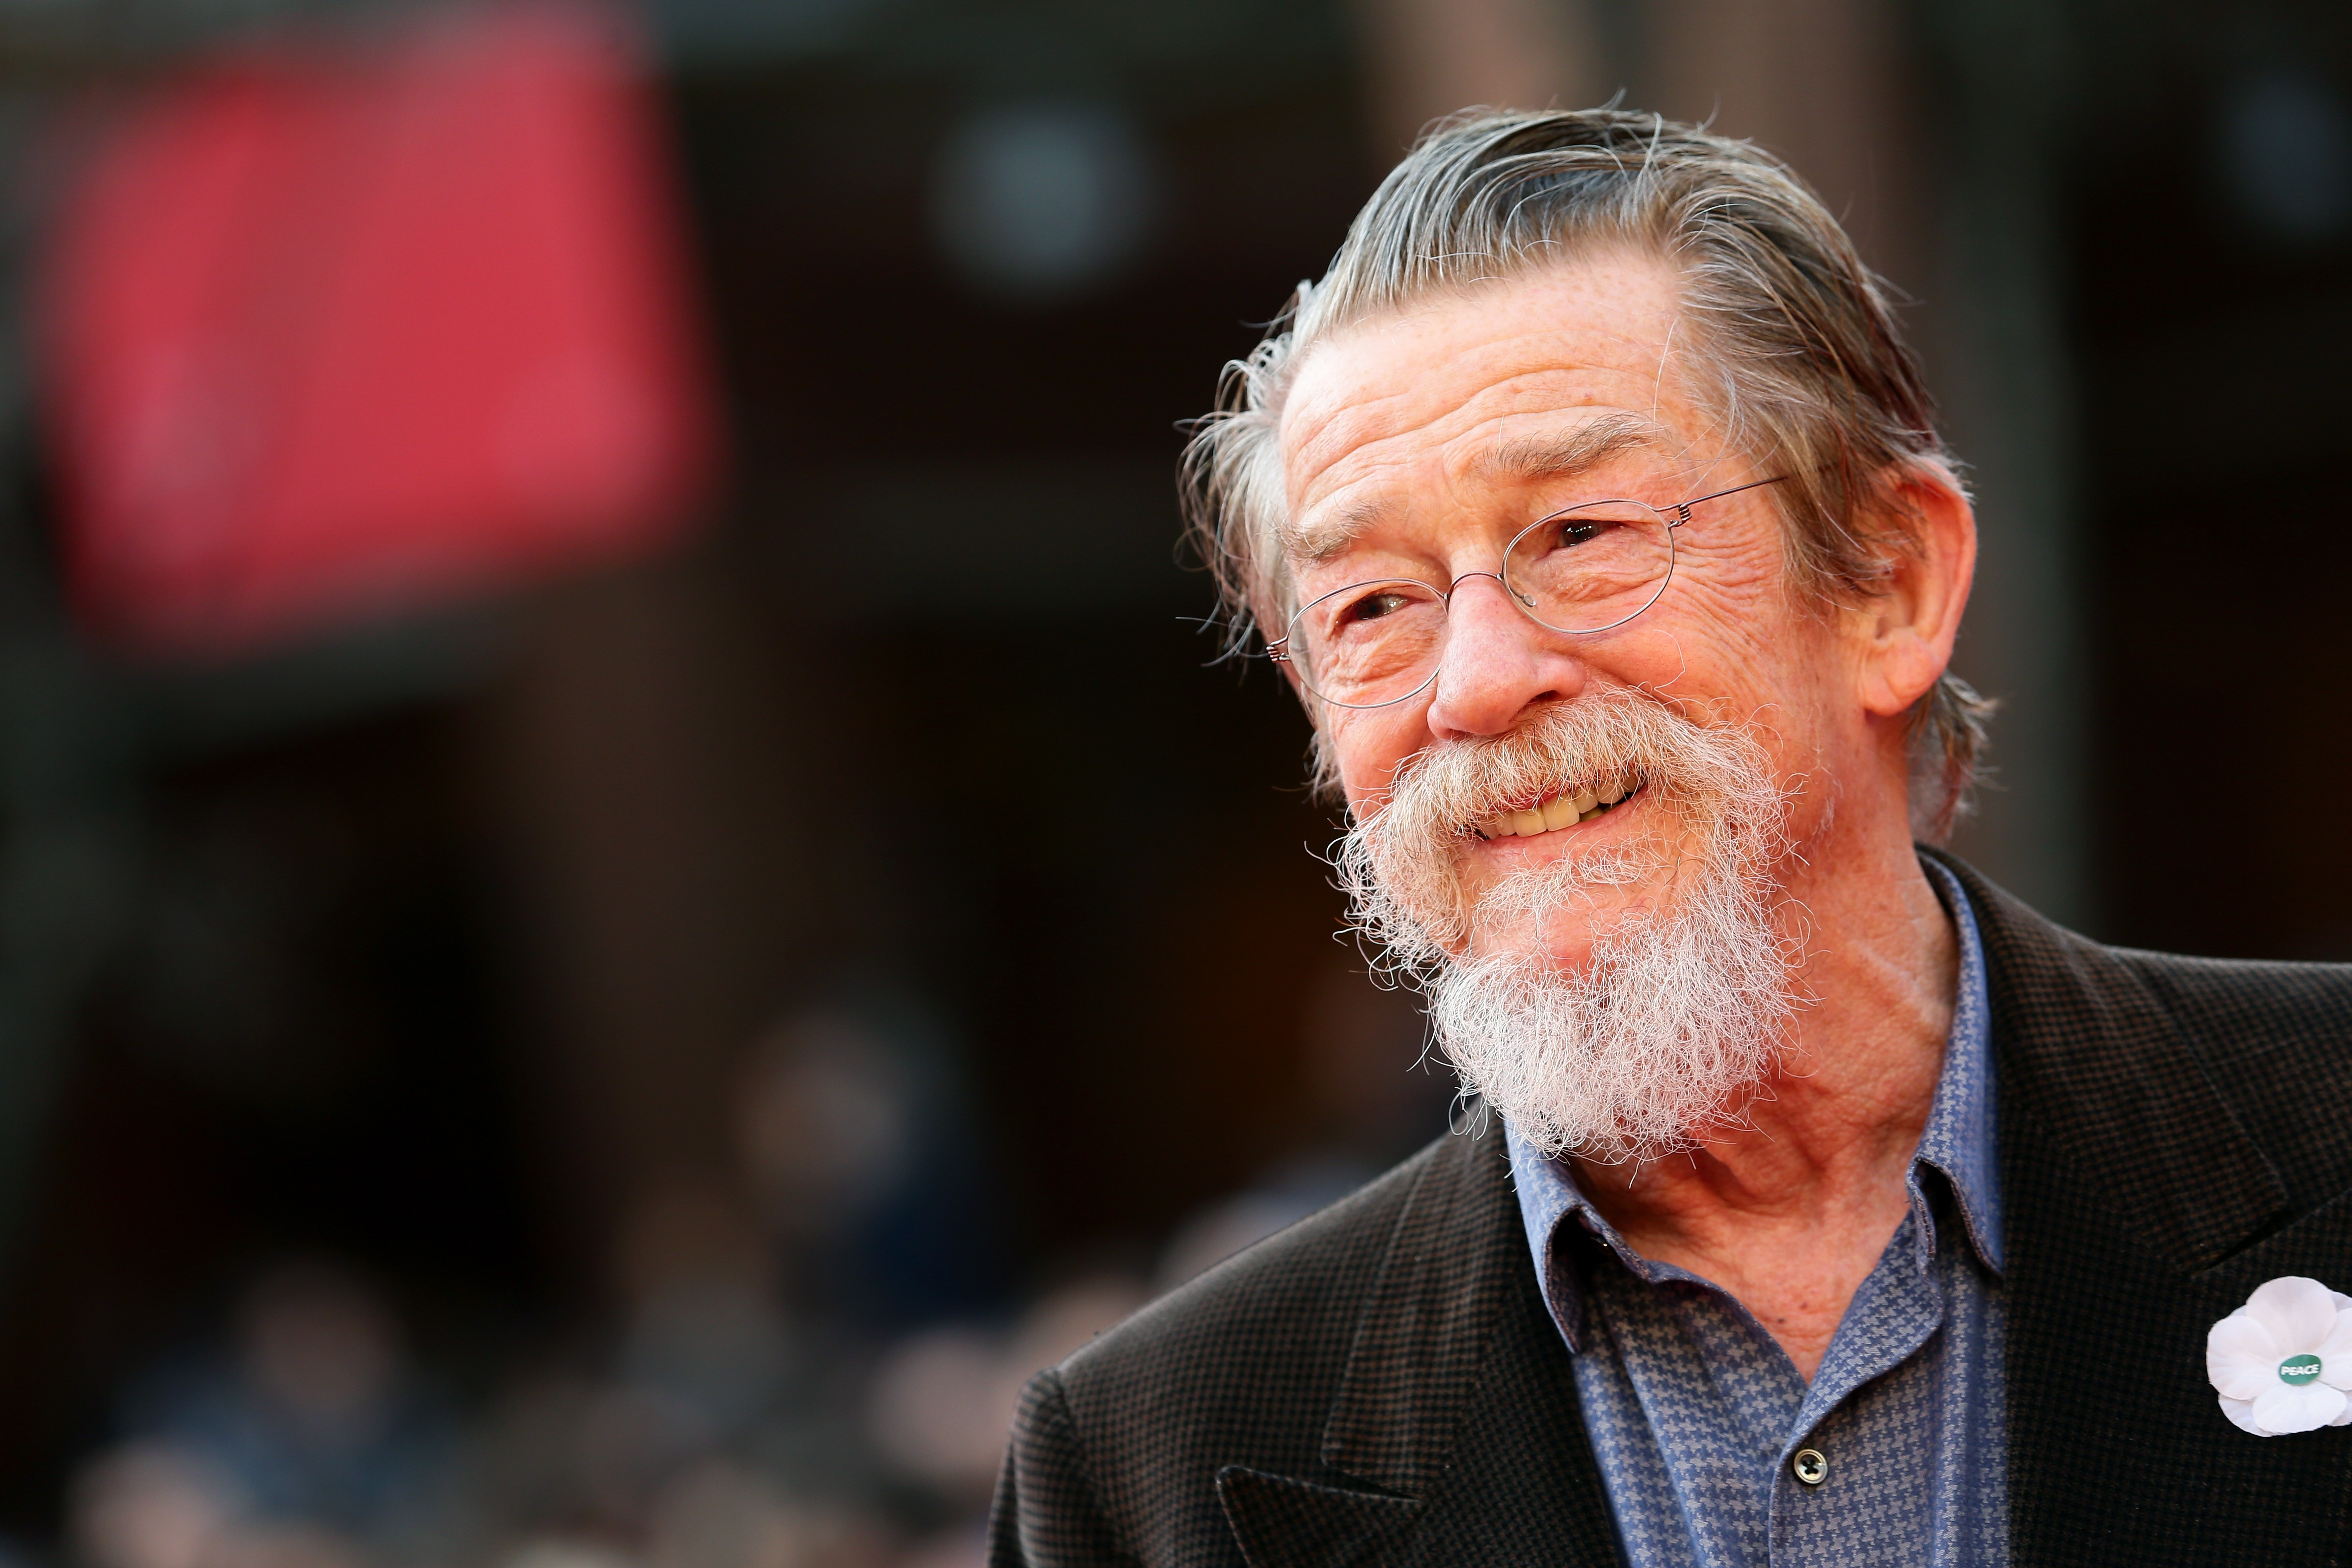 John Hurt appears on the red carpet during the 8th Rome Film Festival at Auditorium Parco Della Musica on November 9, 2013 in Rome, Italy. (Vittorio Zunino Celotto—Getty Images)